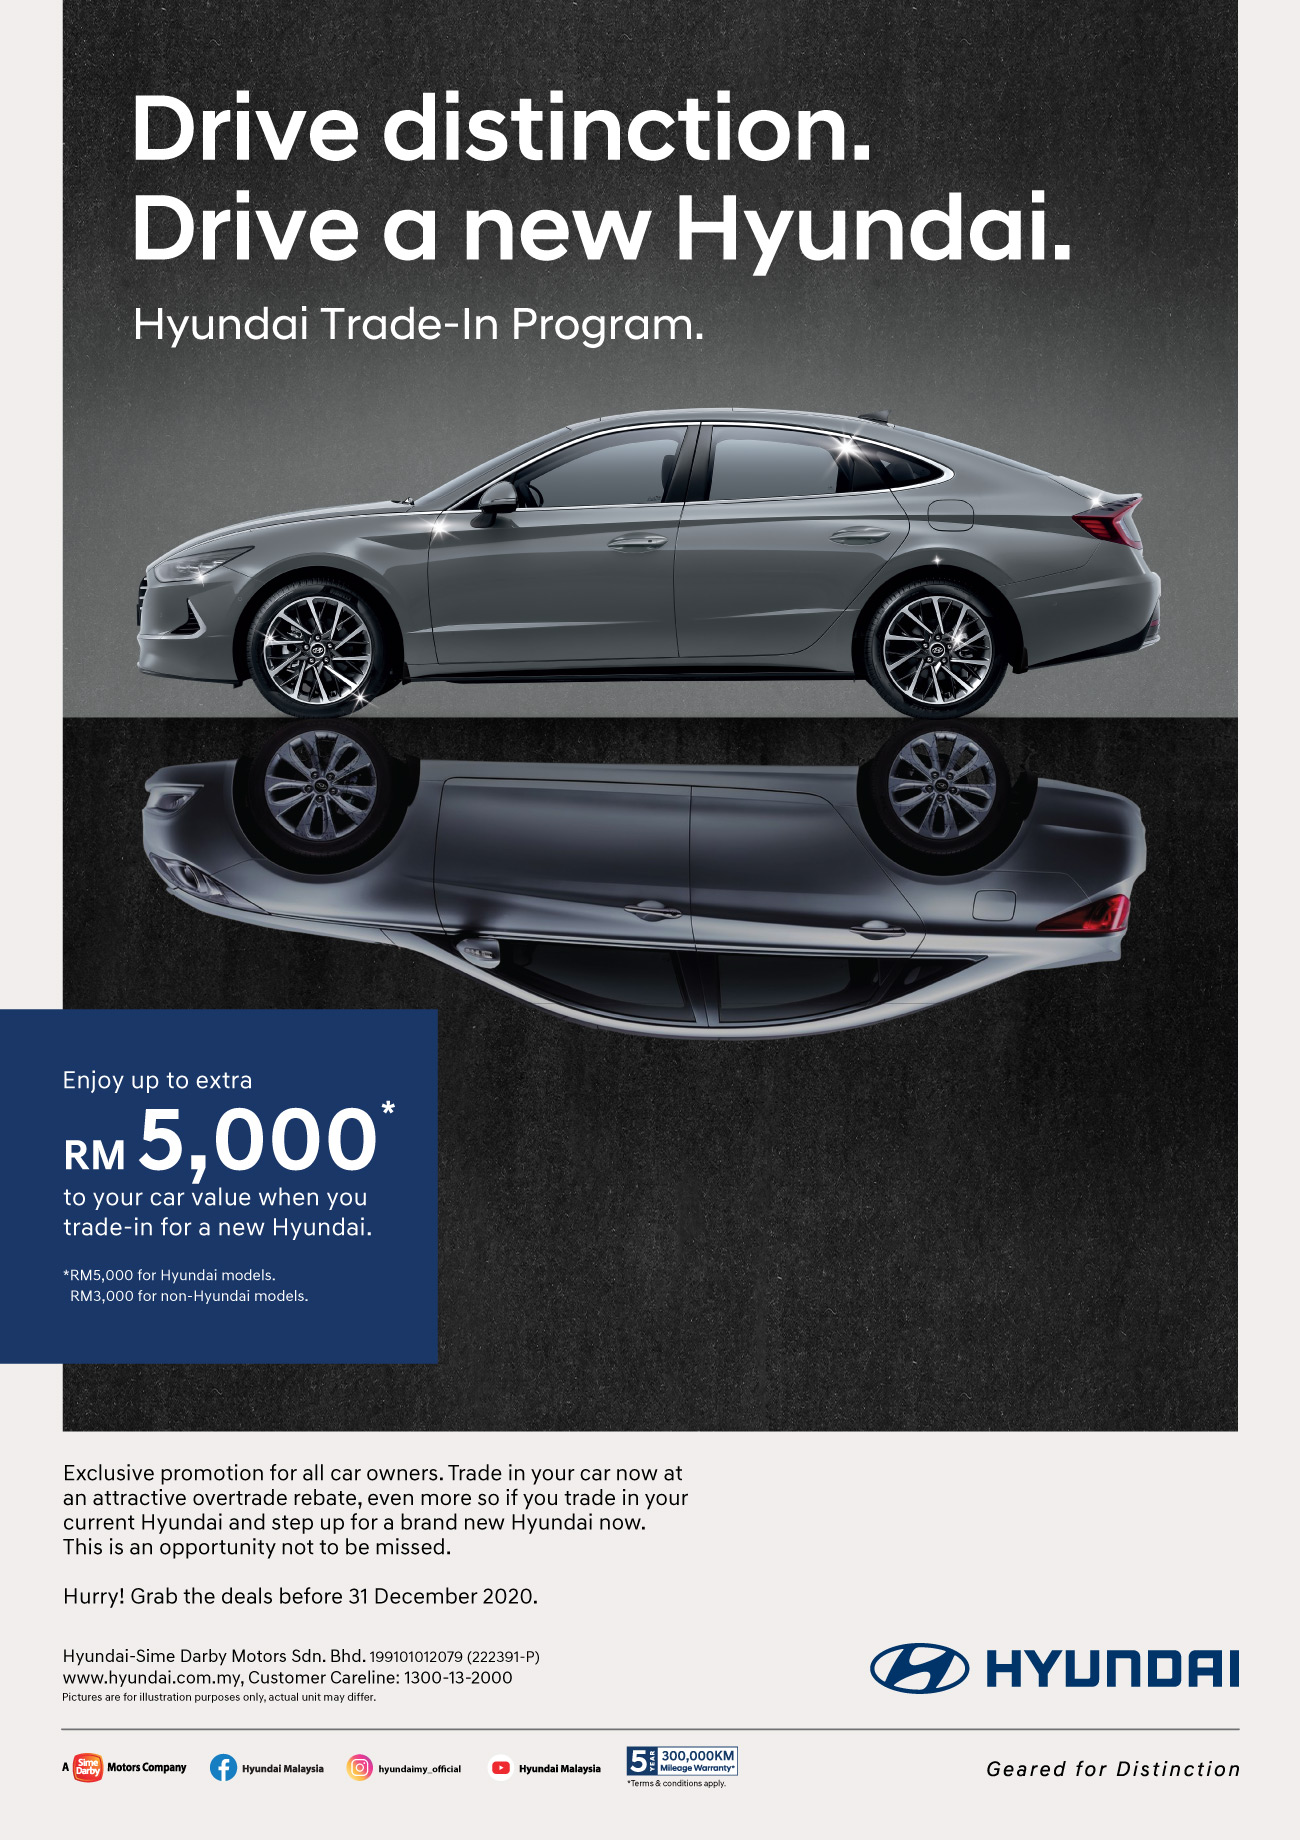 Drive distinction. Drive a new Hyundai. Hyundai Trade-in Program - Enjoy up to extra RM 5,000* to your car value when you trade-in for a new Hyundai | Exclusive promotion for all car owners. Trade in your car now at an attractive overtrade rebate, even more so if you trade in your current Hyundai and step up for a brand new Hyundai now. This is an opportunity not to be missed. Hurry! Grab the deals before 31 December 2020. | For more information, contact customer careline at 1300-13-2000. Terms apply.